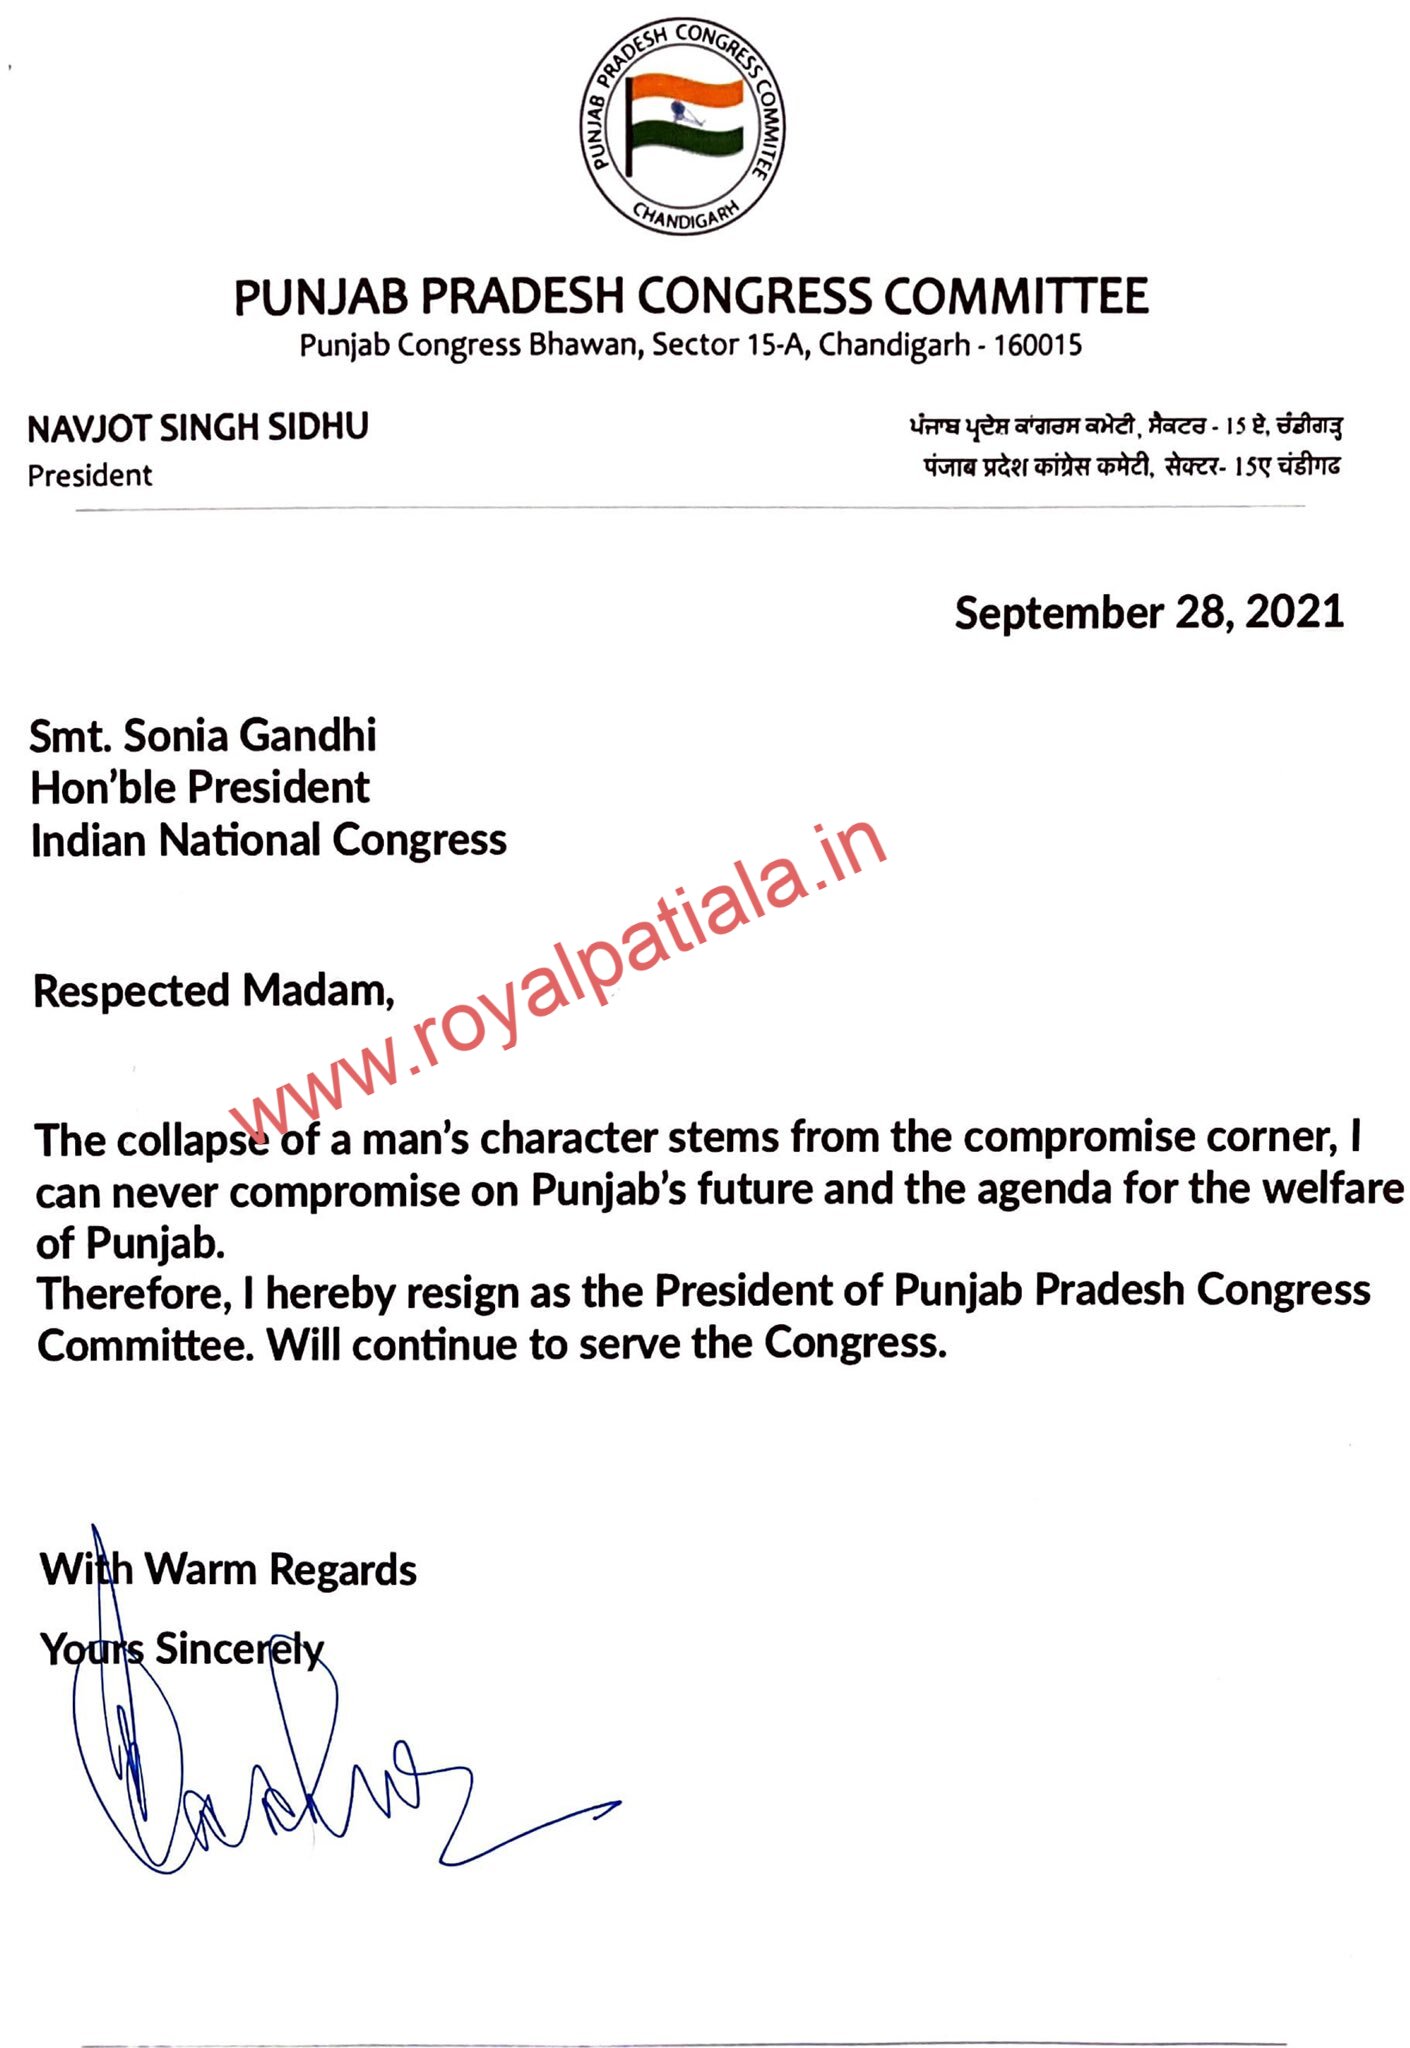 Navjot Sidhu letter to Sonia Gandhi bombarded the political atmosphere in Punjab